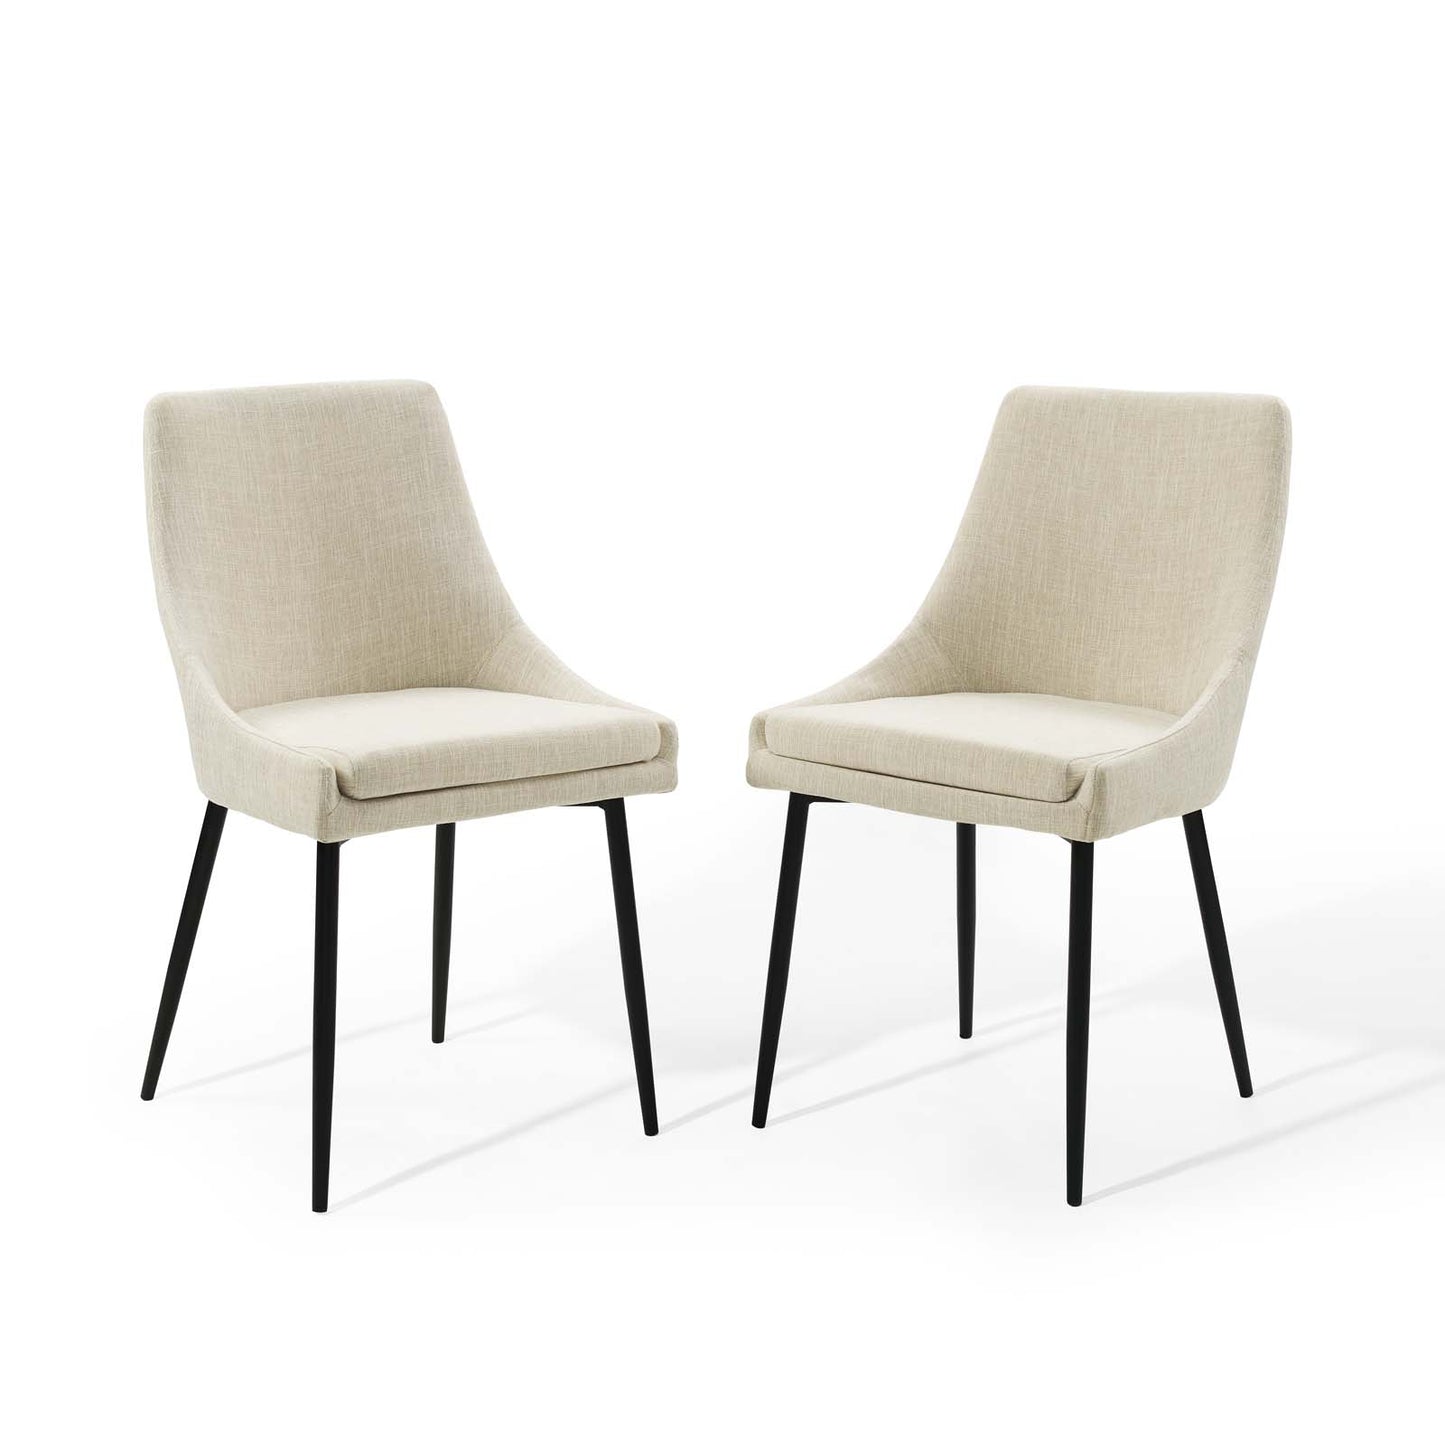 Viscount Upholstered Fabric Dining Chairs - Set of 2 Black Beige EEI-3809-BLK-BEI